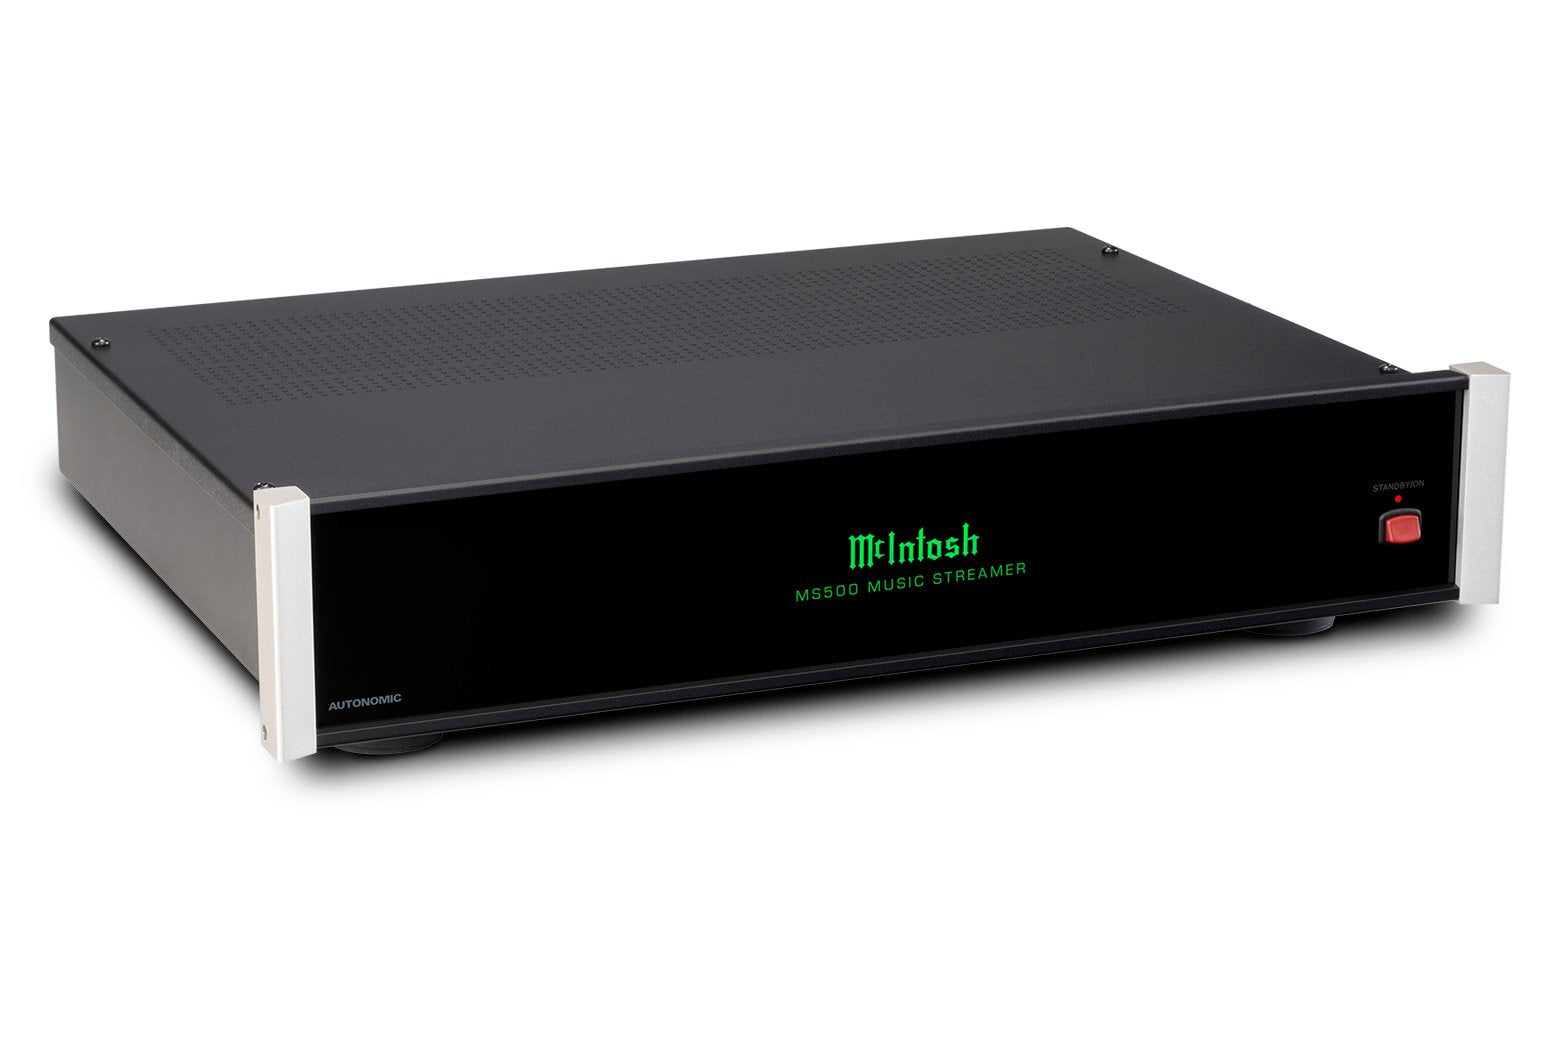 McIntosh MS500 Music Streamer (In-Store Purchases Only)